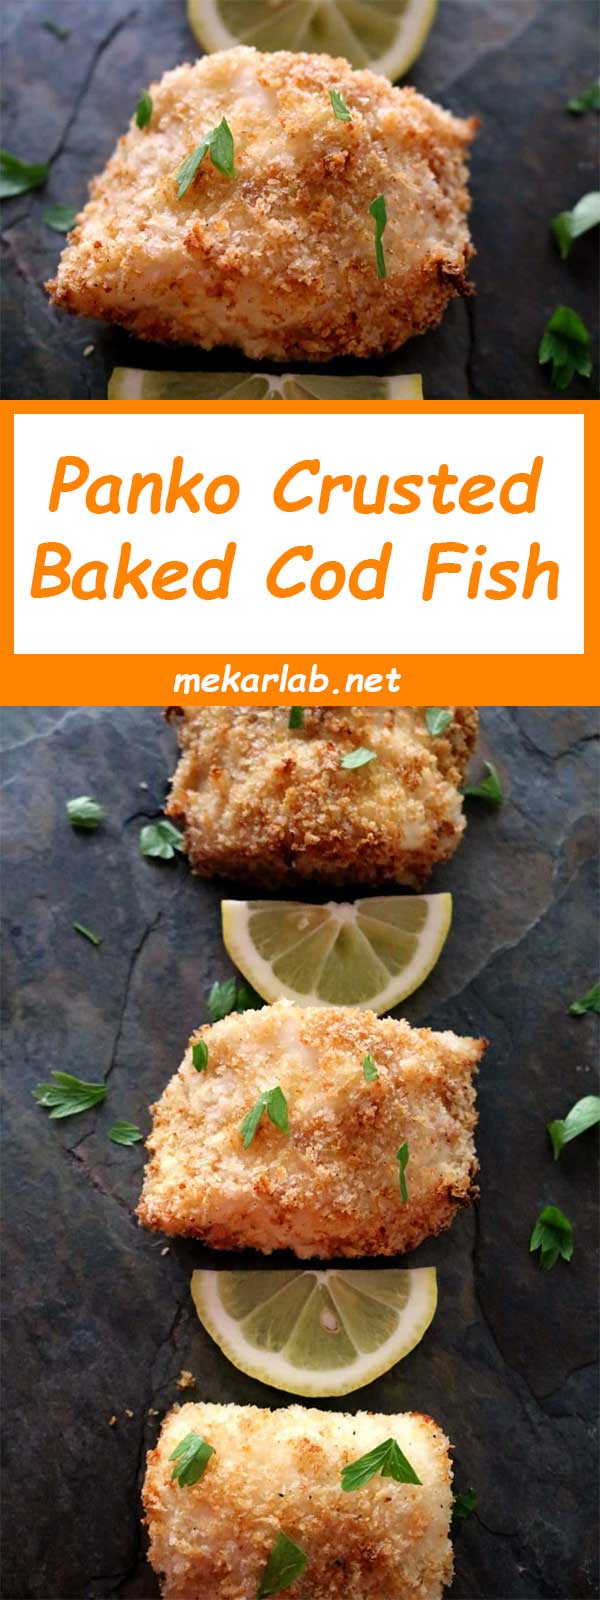 Panko Crusted Baked Cod Fish